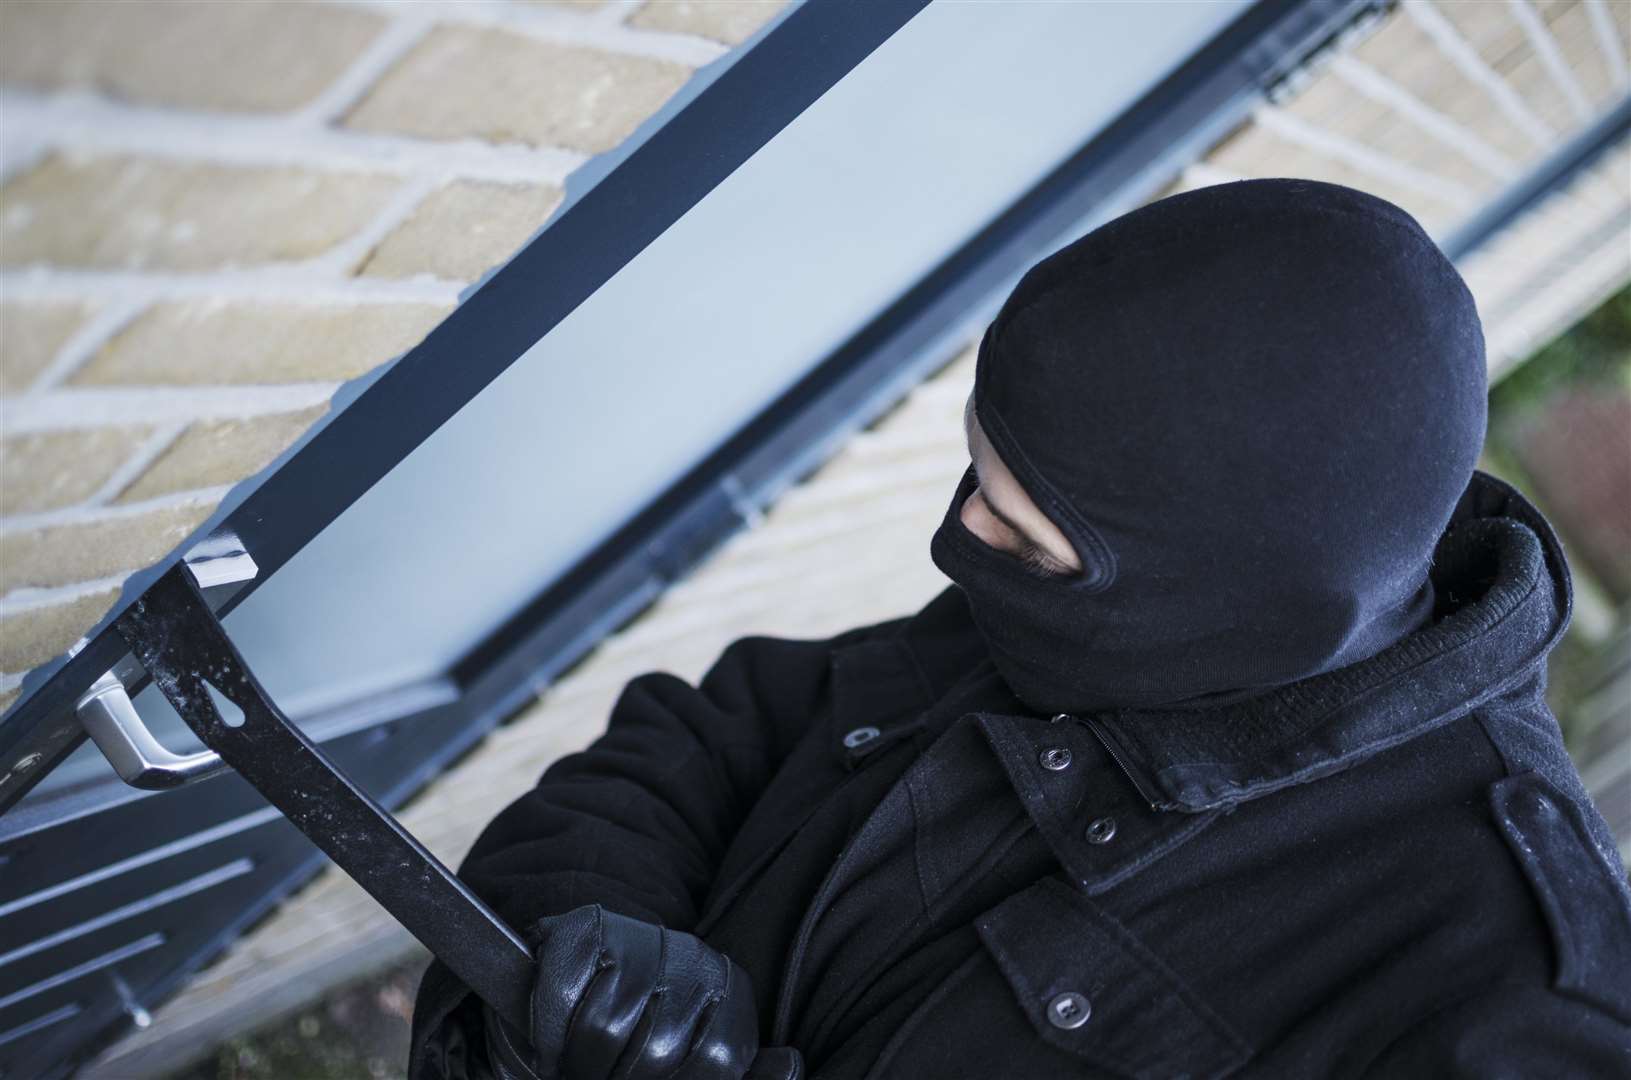 Three shops in Birchington and Broadstairs were broken into this morning